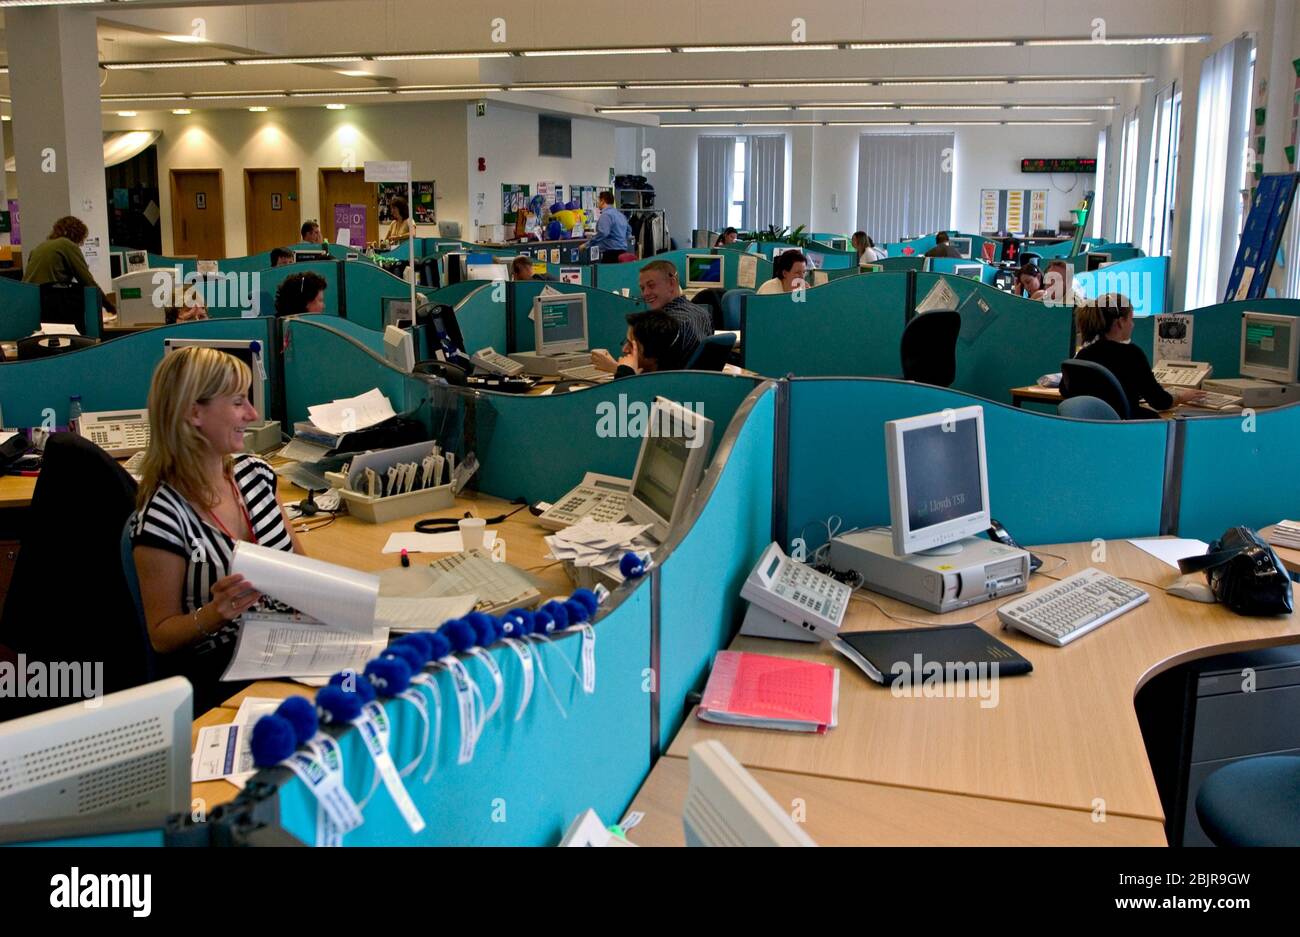 Workers at bank call centre due to be outsourced to India making UK staff redundant North East England 2004 Stock Photo